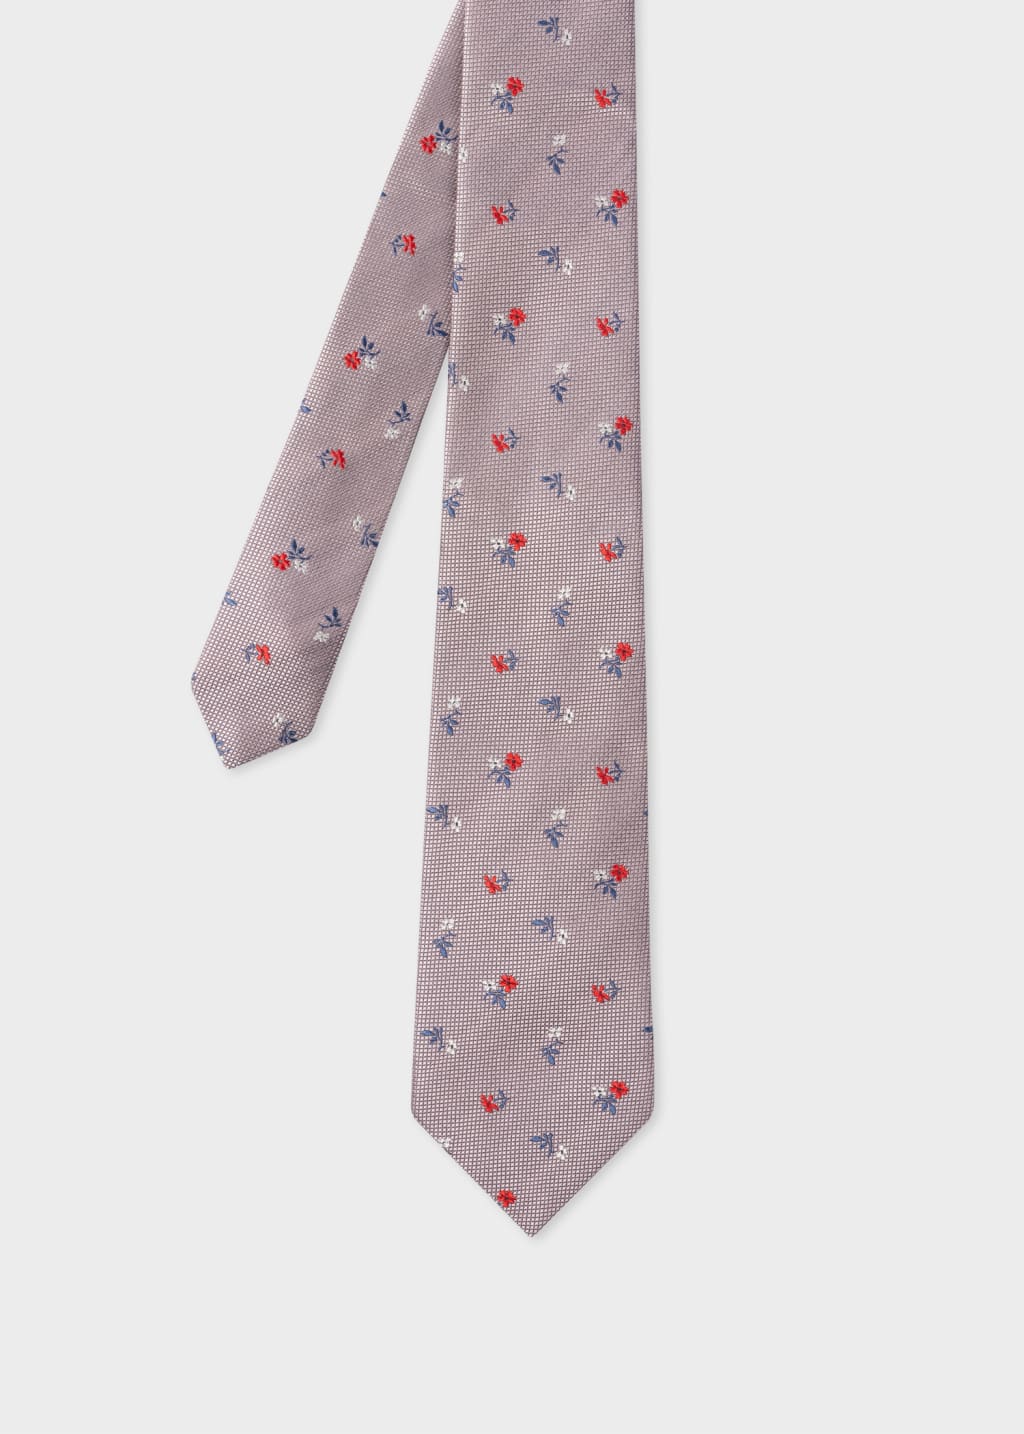 Front View - Pink 'Mini Flowers' Tie Paul Smith